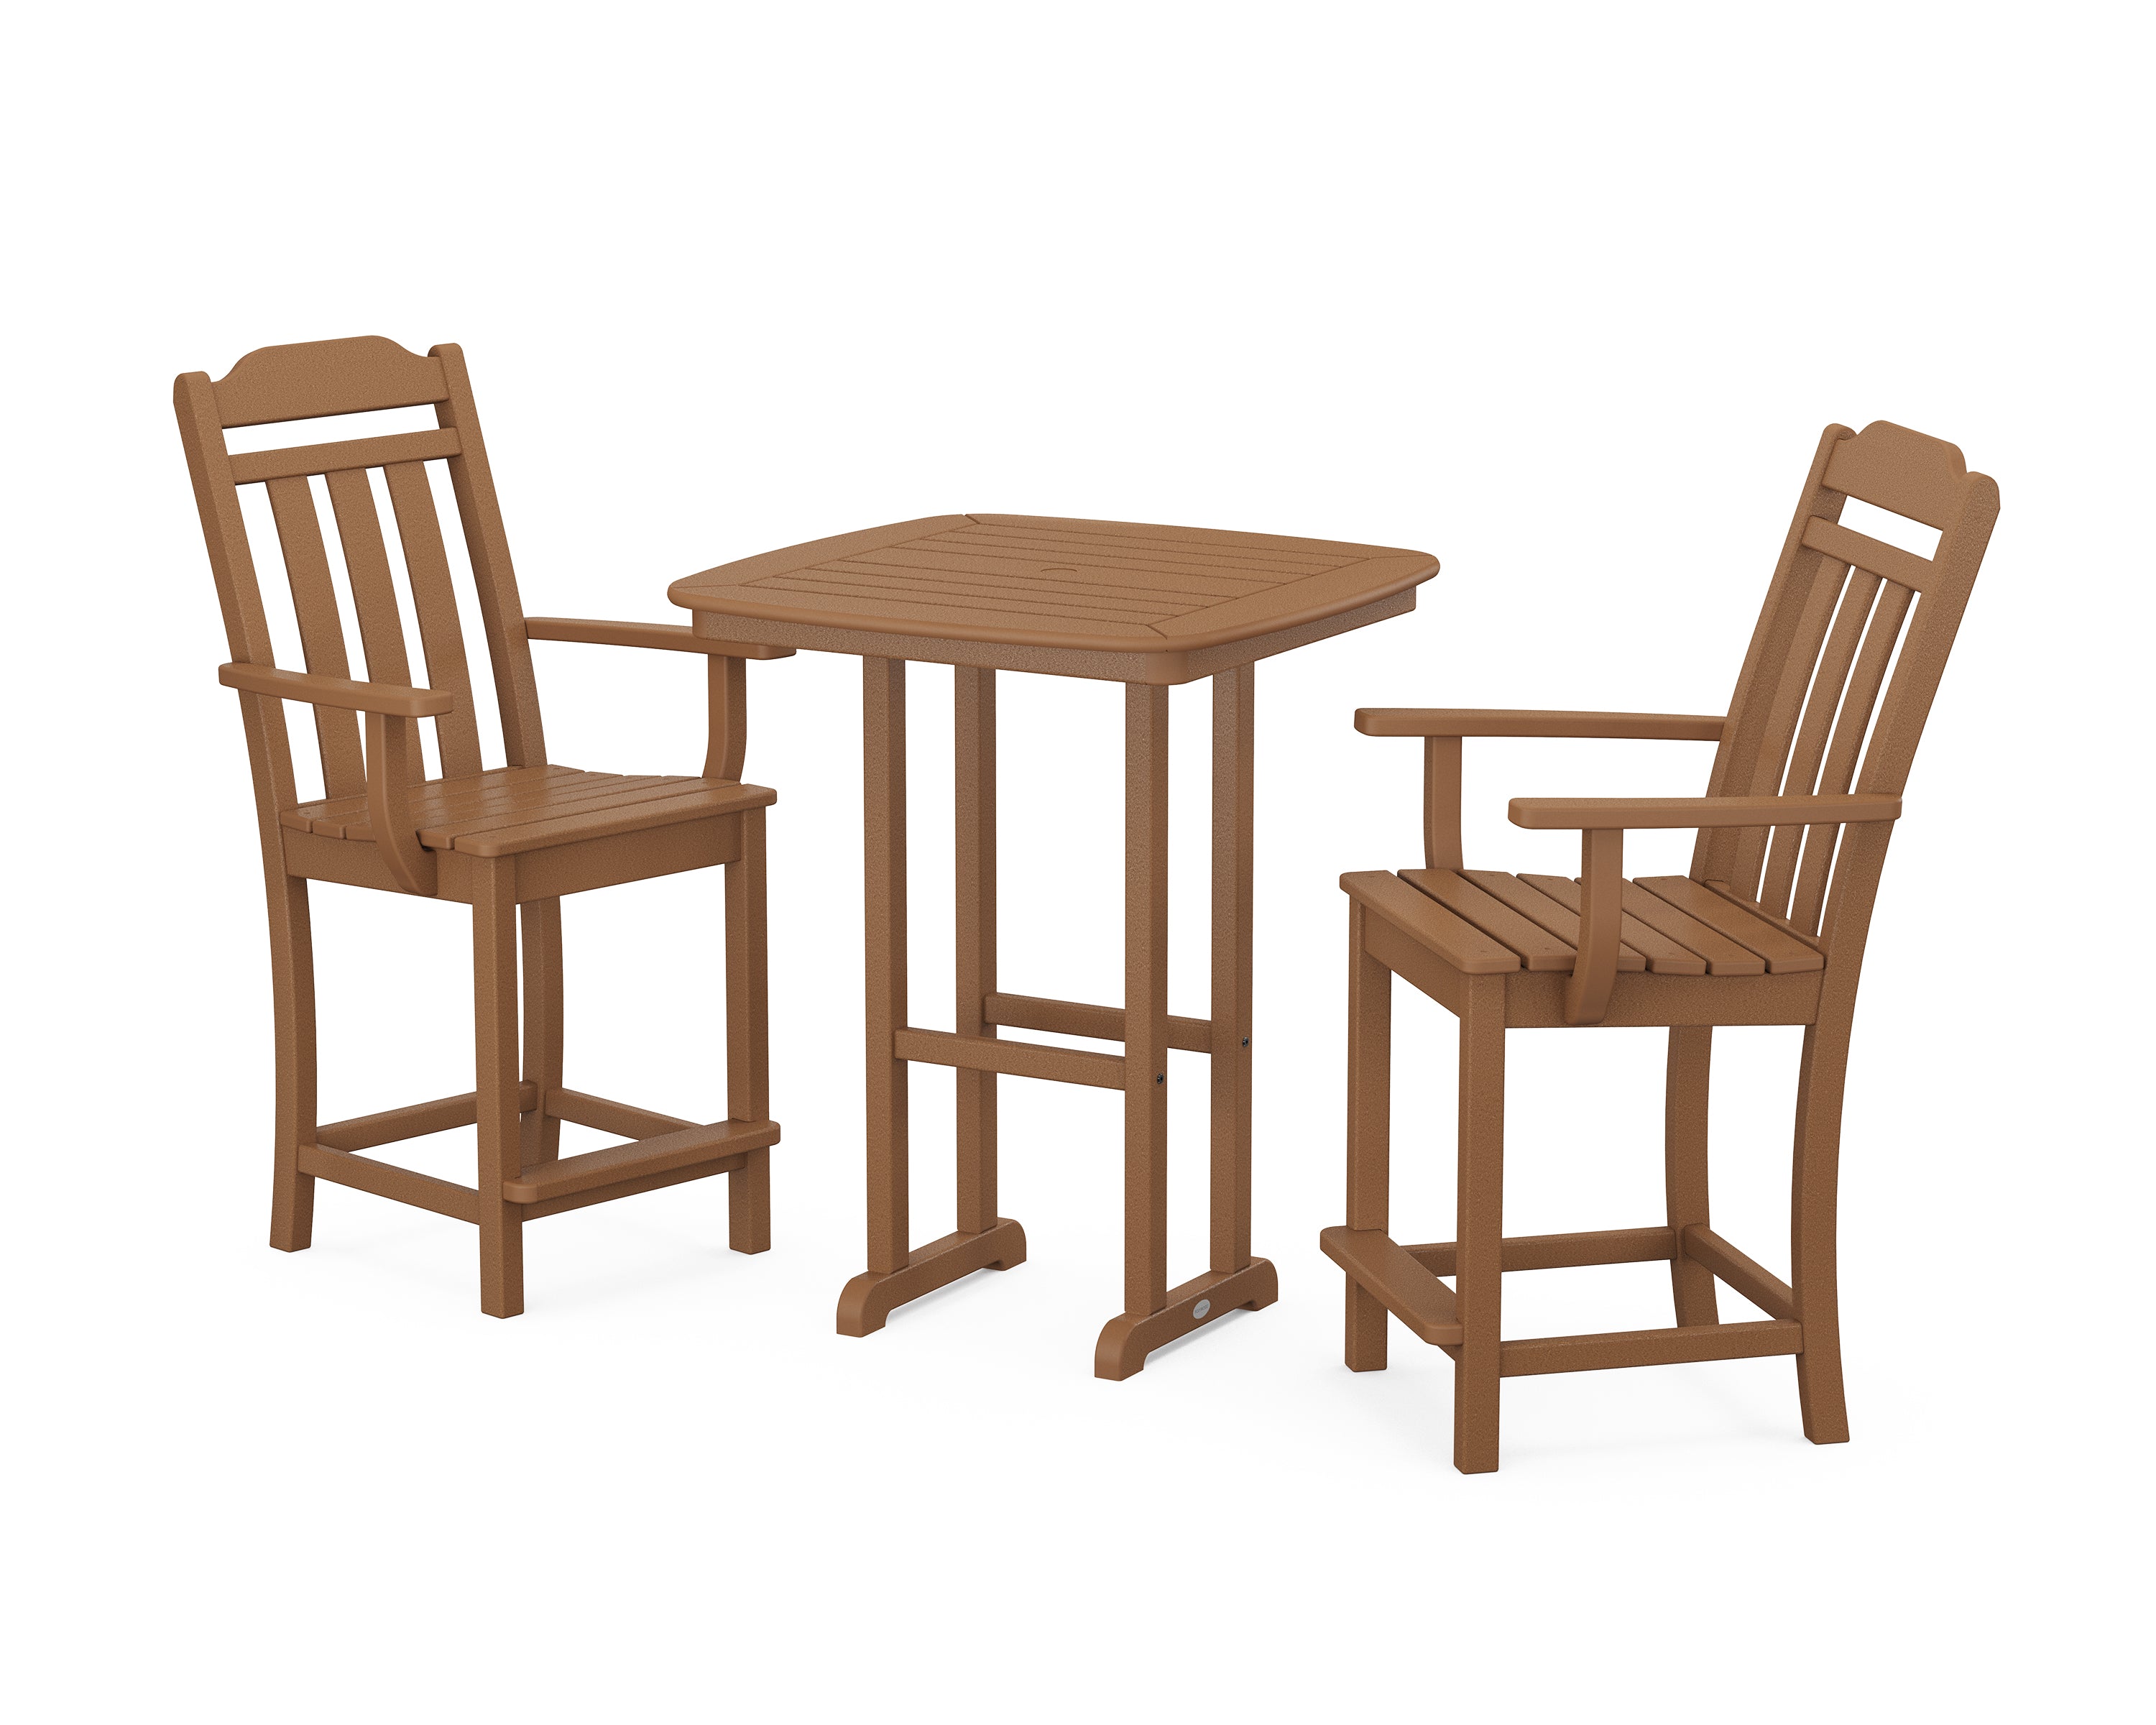 POLYWOOD Country Living 3-Piece Counter Set in Teak